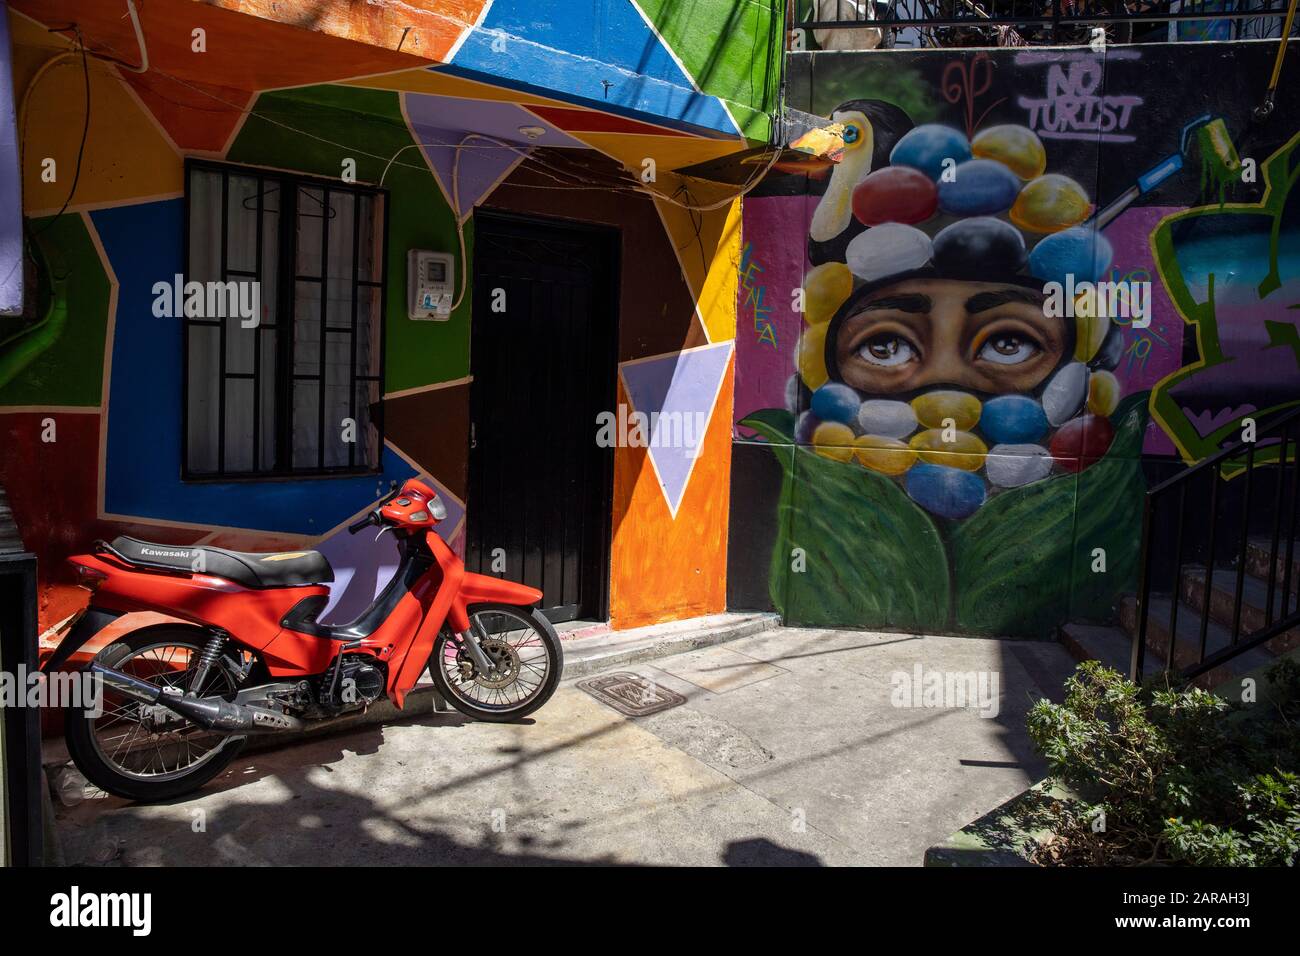 Medellin, Colombia: Comuna 13, these days the area is known for the graffiti/ street art which has helped transform this area. Stock Photo